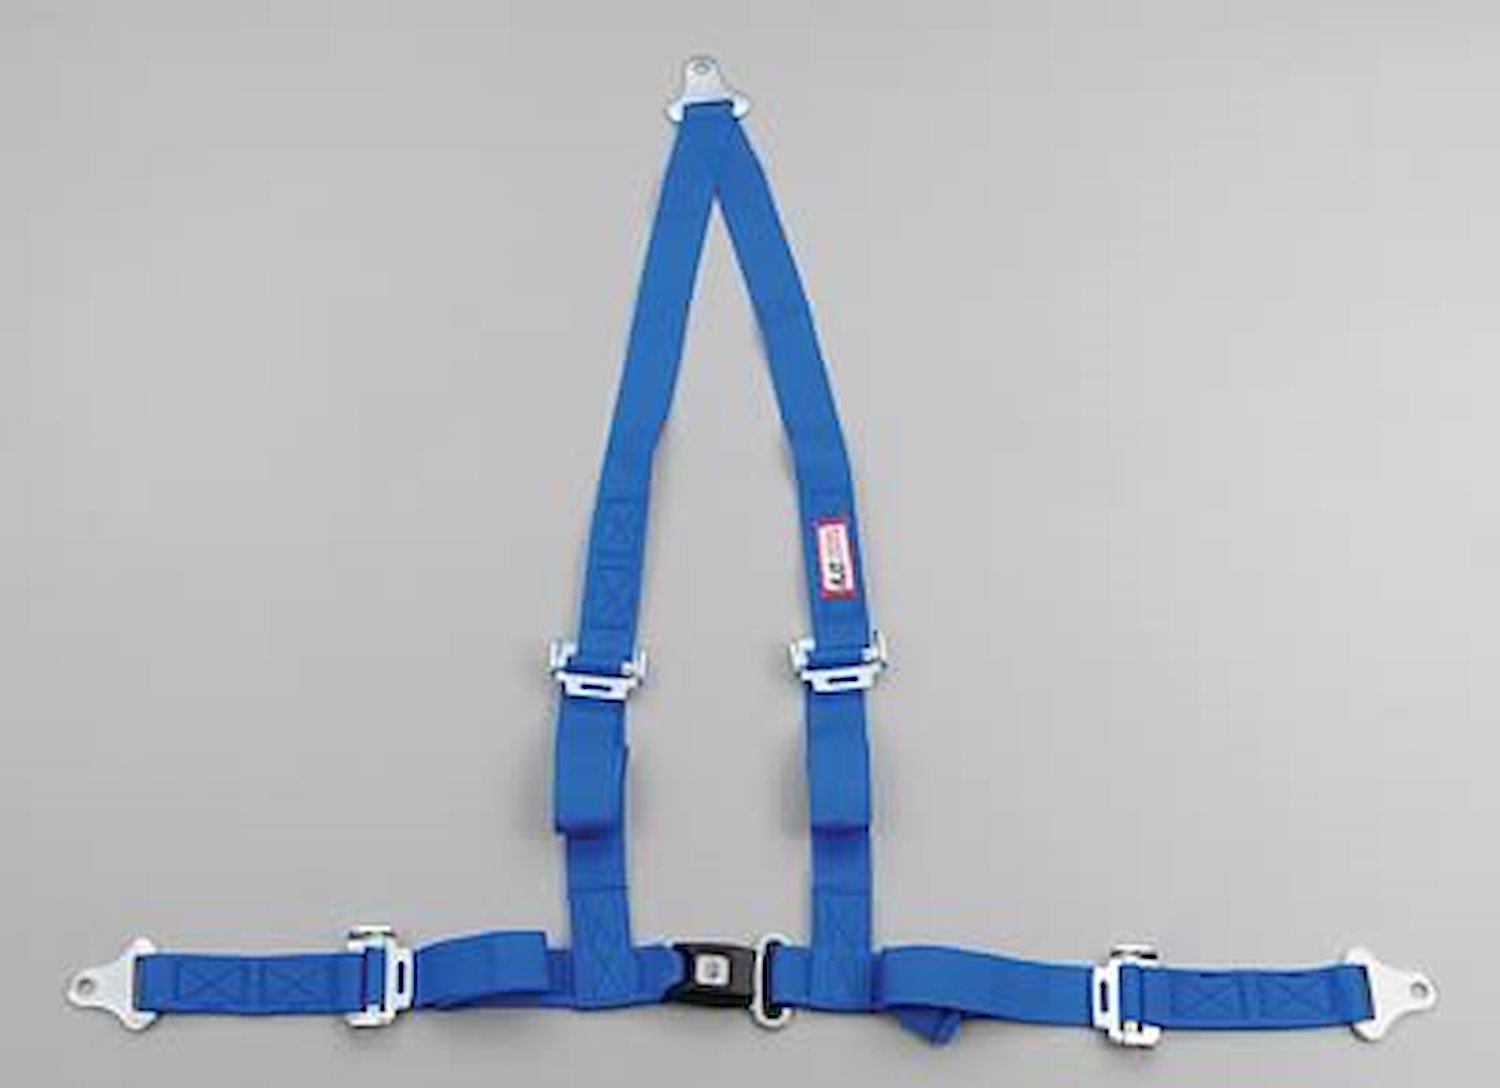 NON-SFI B&T HARNESS 2 PULL UP Lap Belt 2 S. H. Individual ROLL BAR Mount ALL WRAP ENDS w/STERNUM STRAP BLUE